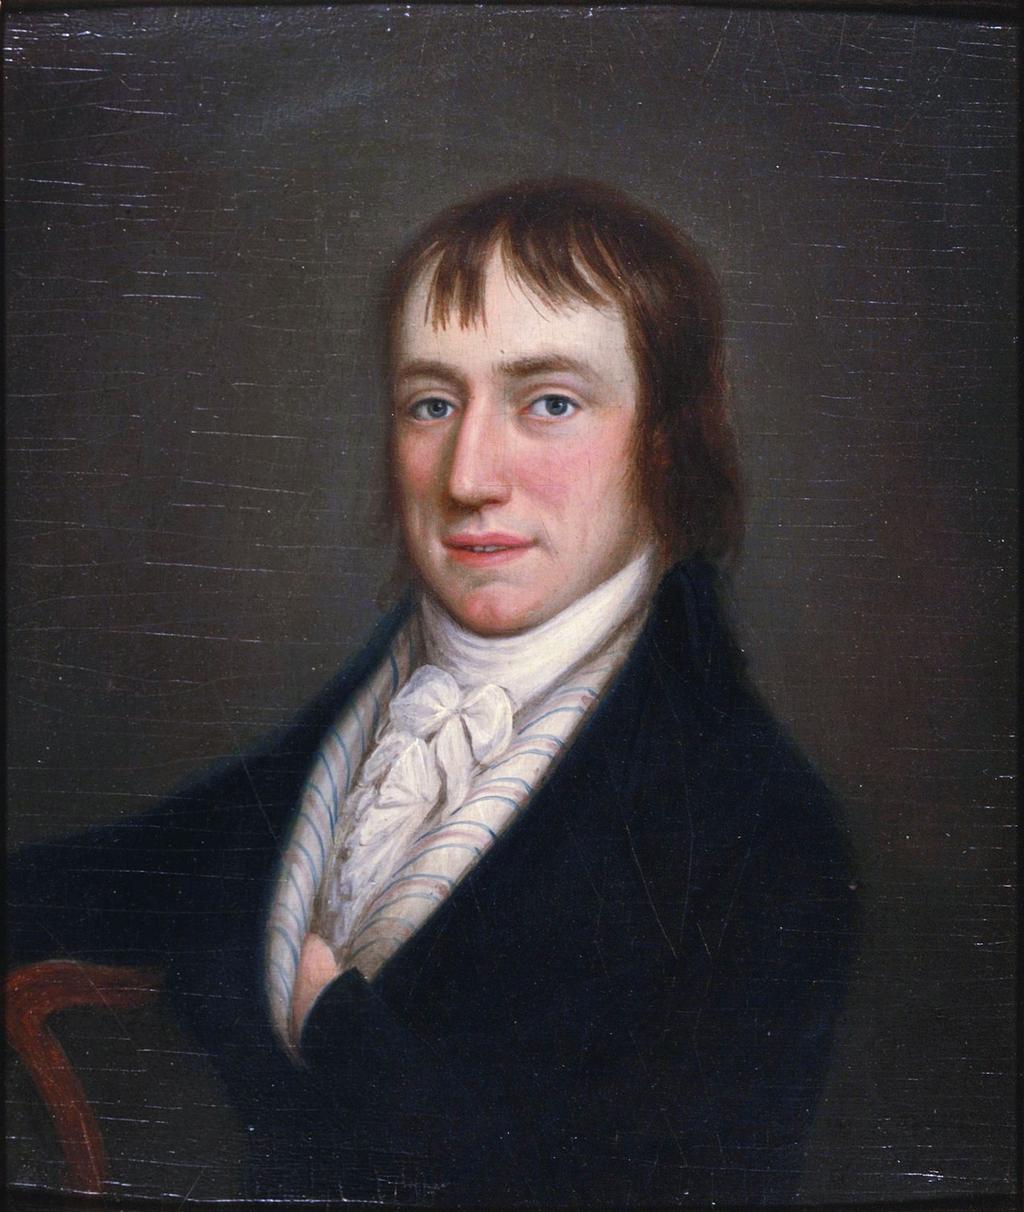 1770 1850 WILLIAM WORDSWORTH William Wordsworth and Samuel Taylor Coleridge helped to launch the Romantic Age in English literature with their joint publication Lyrical Ballads (1798).